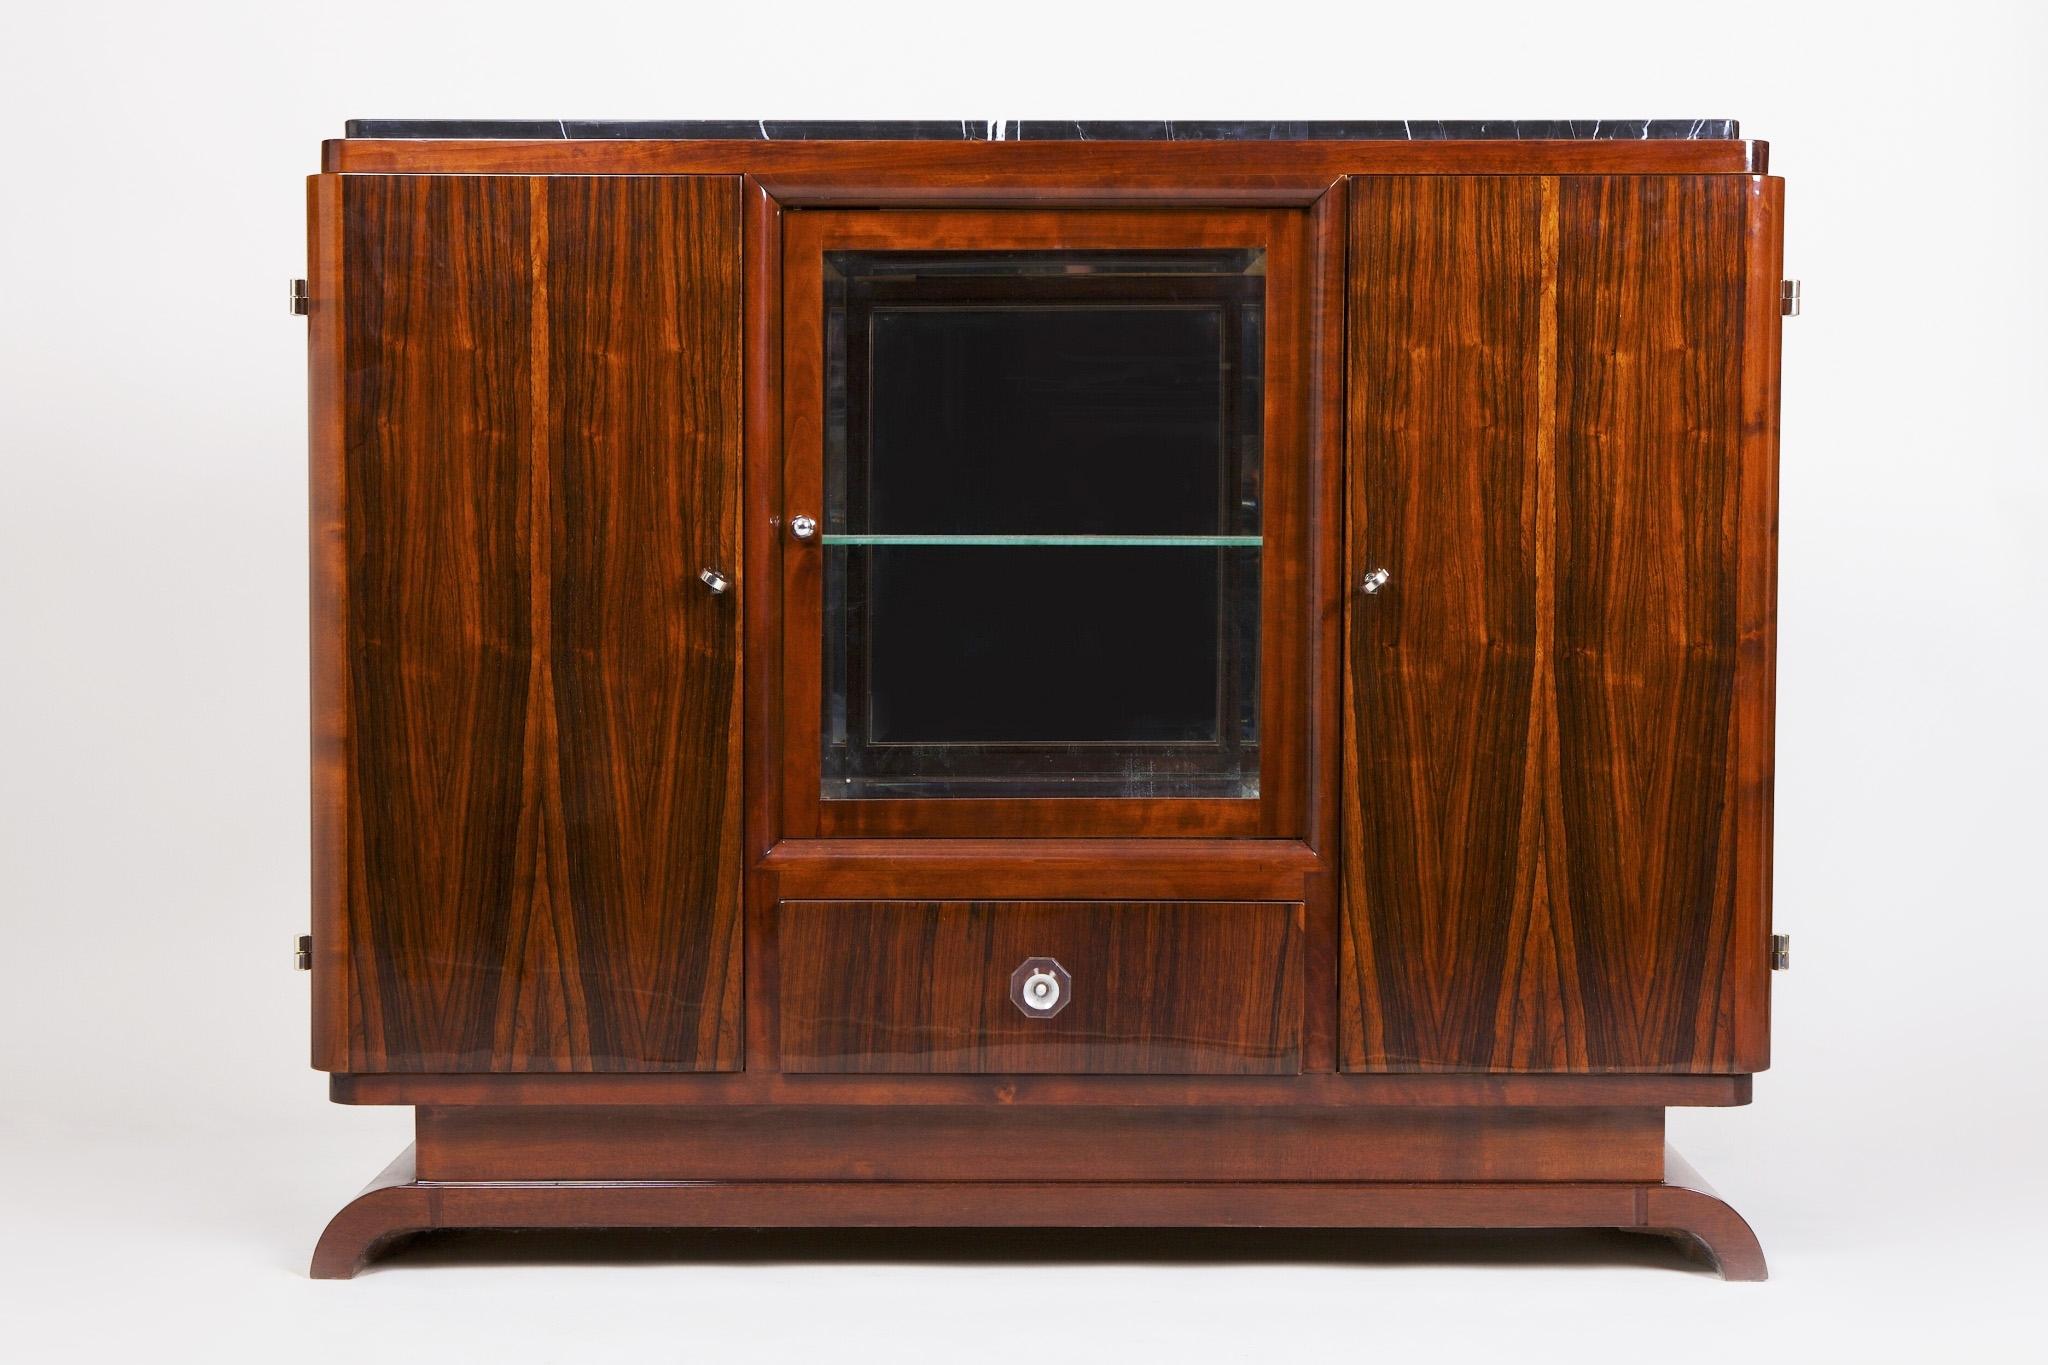 Mirror French Art Deco Sideboard with Marble Desk, 1930-1939, Palisander, Restored For Sale